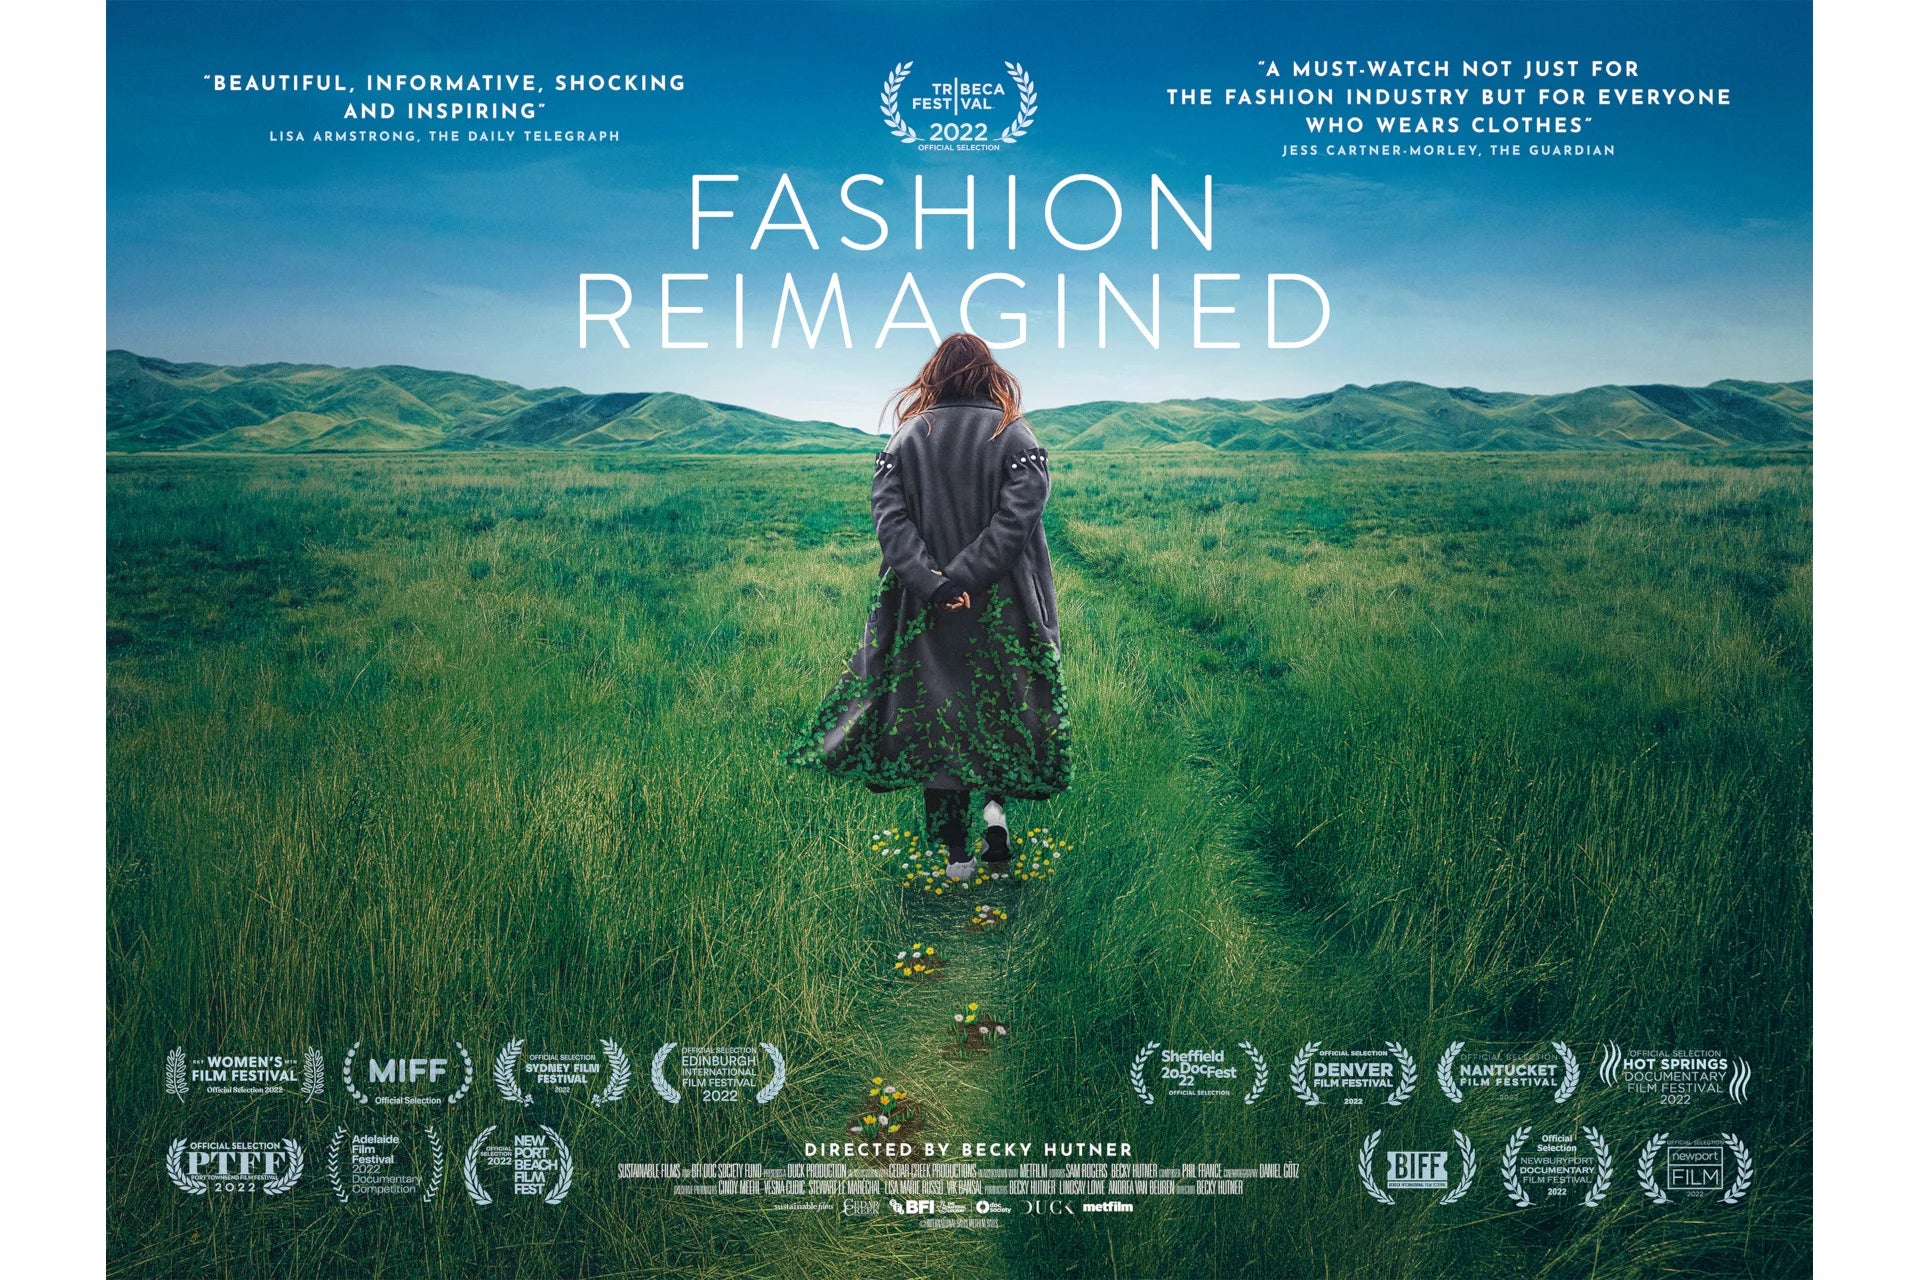 Film lights the way to sustainability in fashion